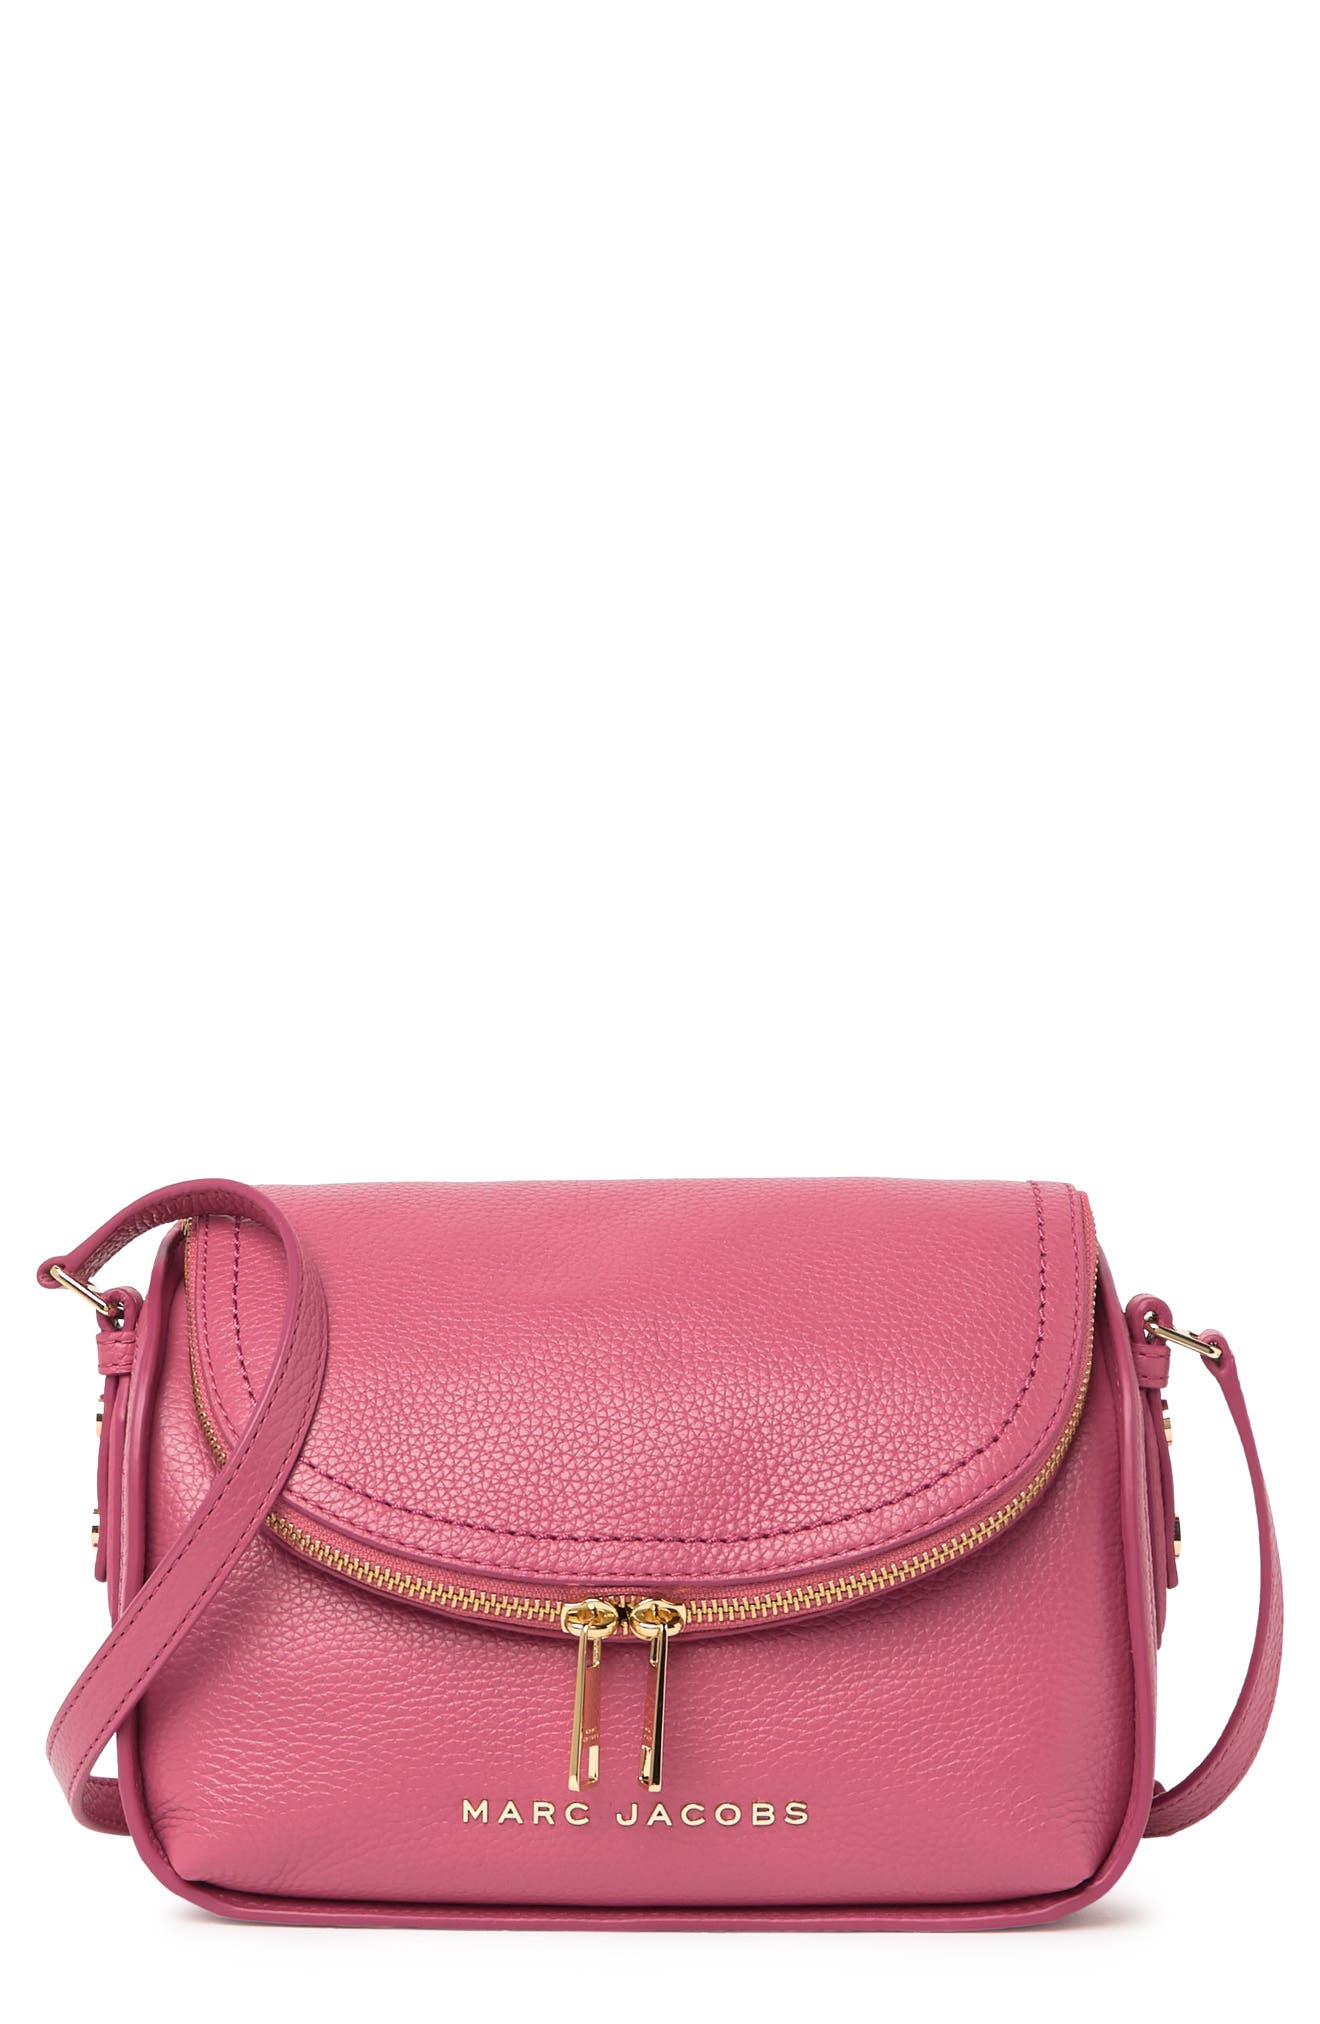 Marc Jacobs The Groove Leather Mini Messenger Bag Nordstrom Rack